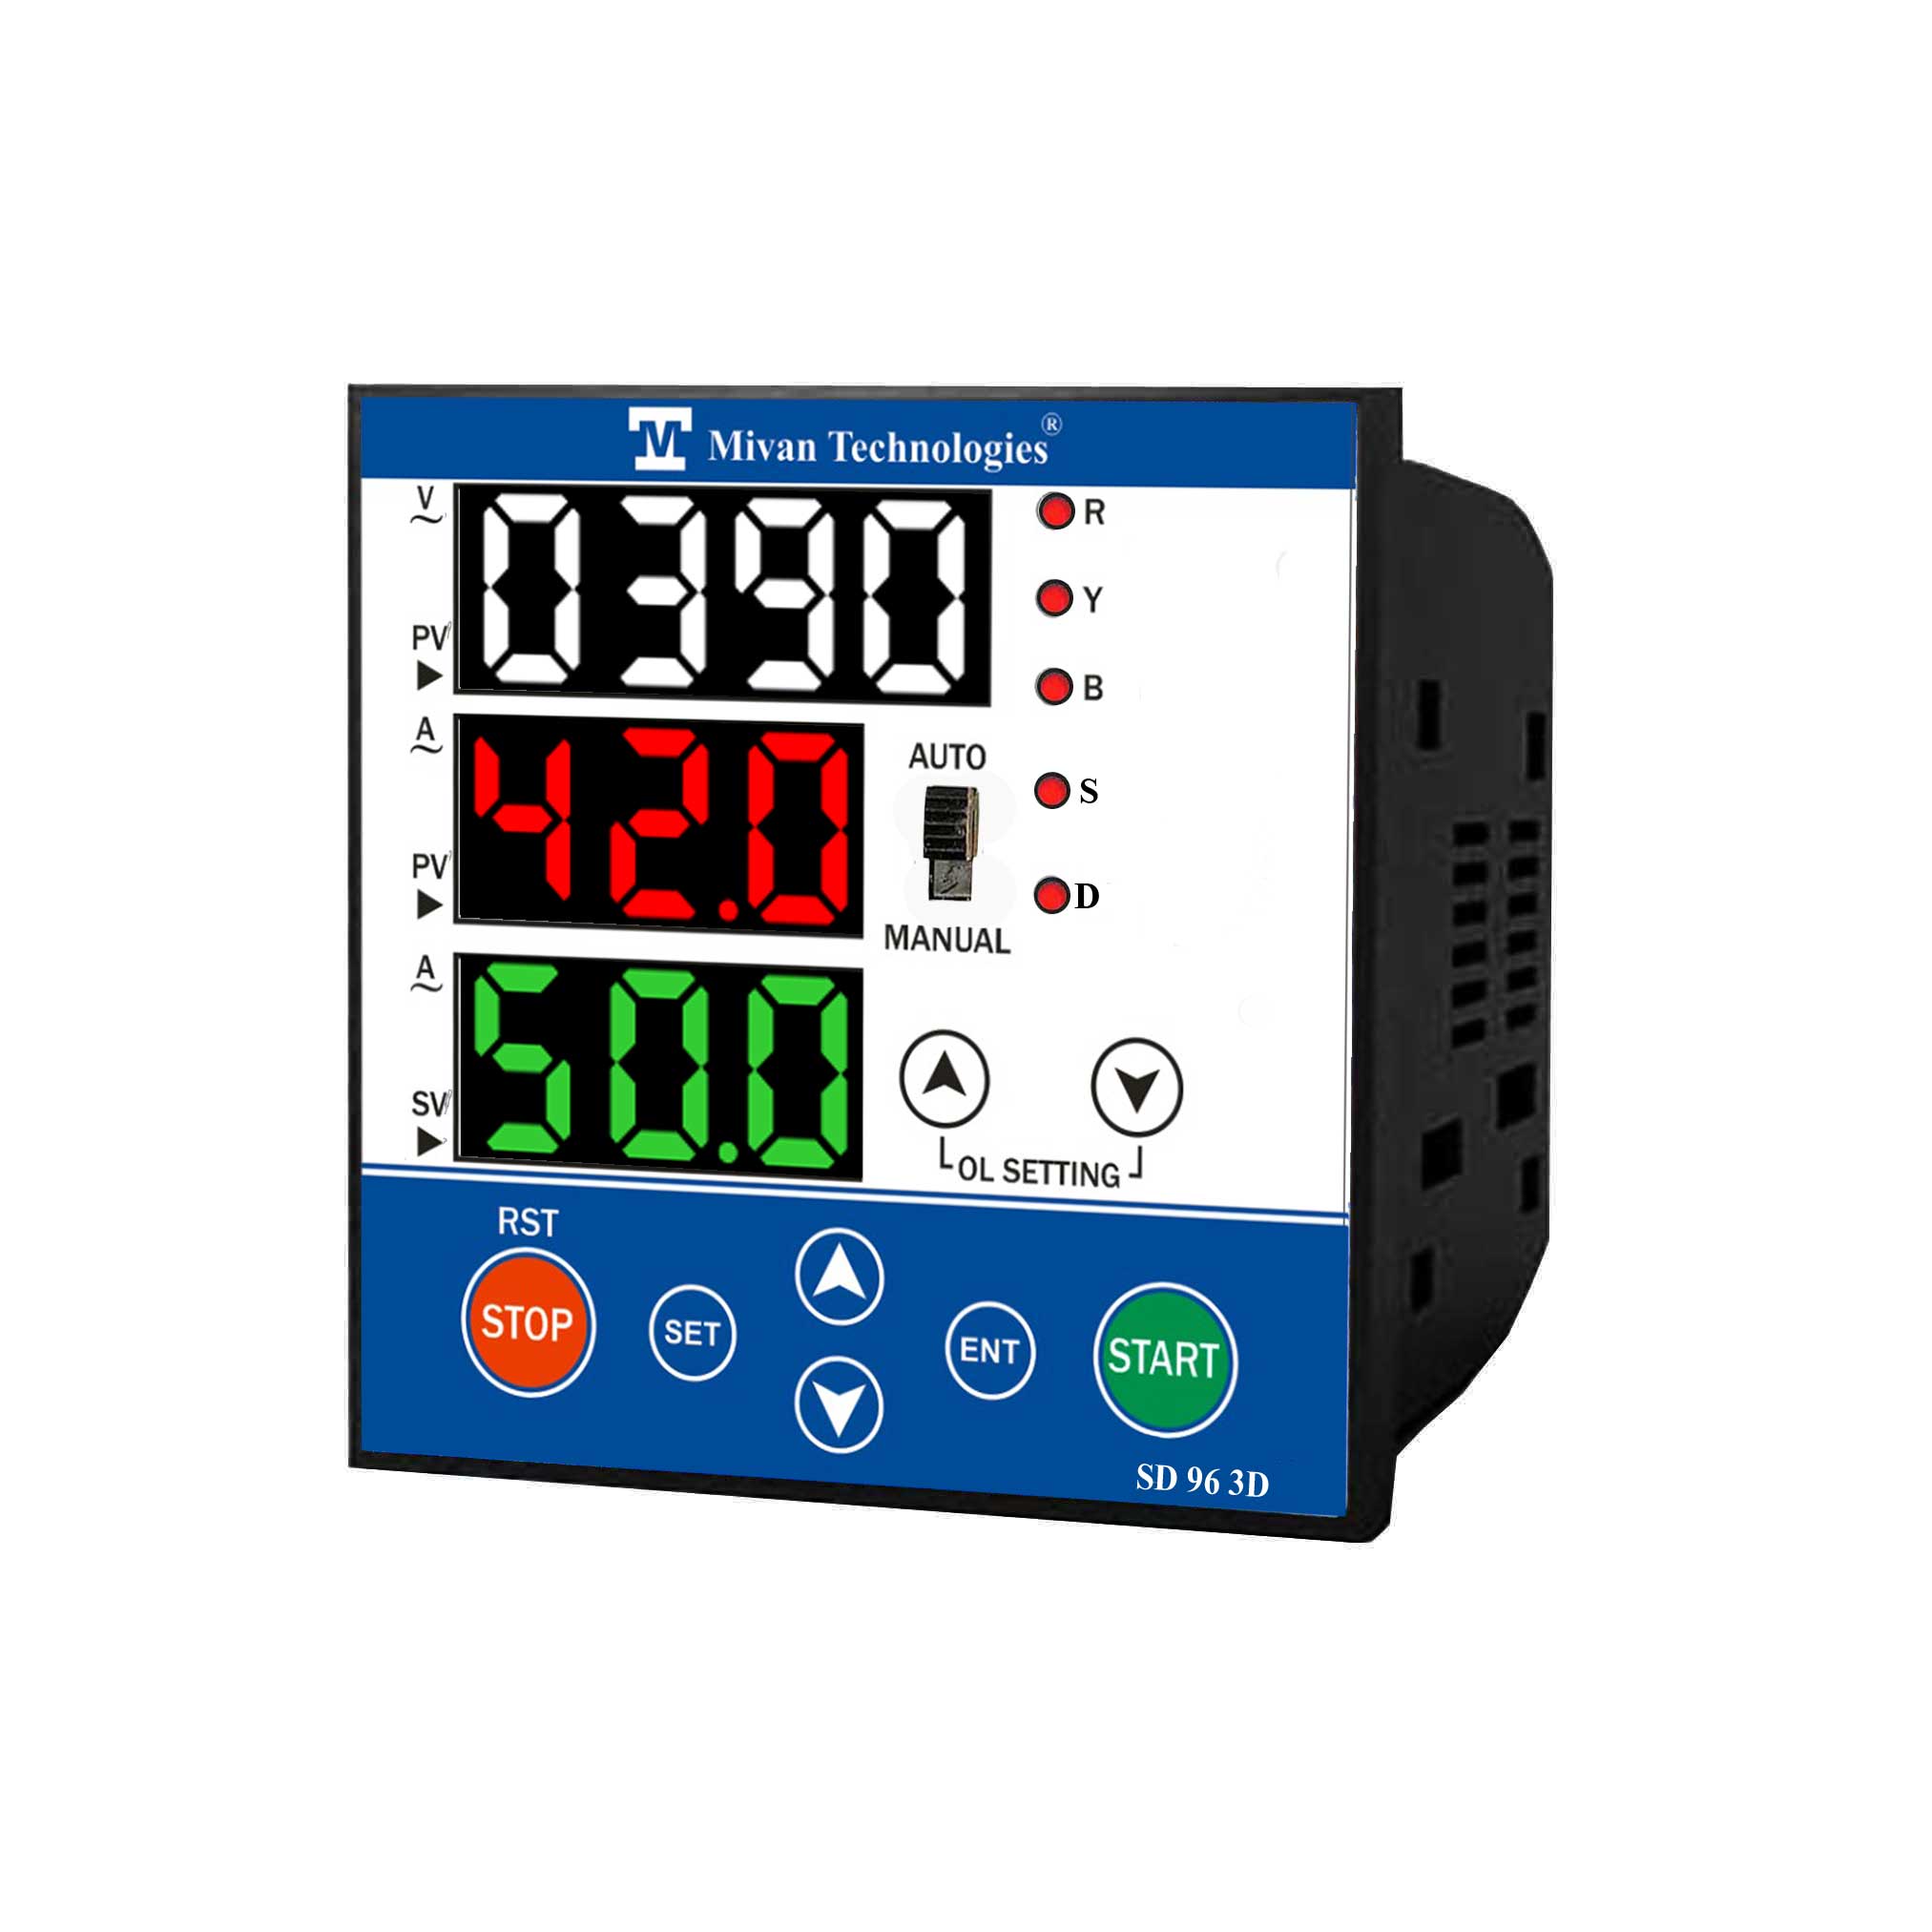 SD 3D 3 display instrument to design any hp Star Delta starter to provide HV LV OL Dry protection with timer spp auto switch